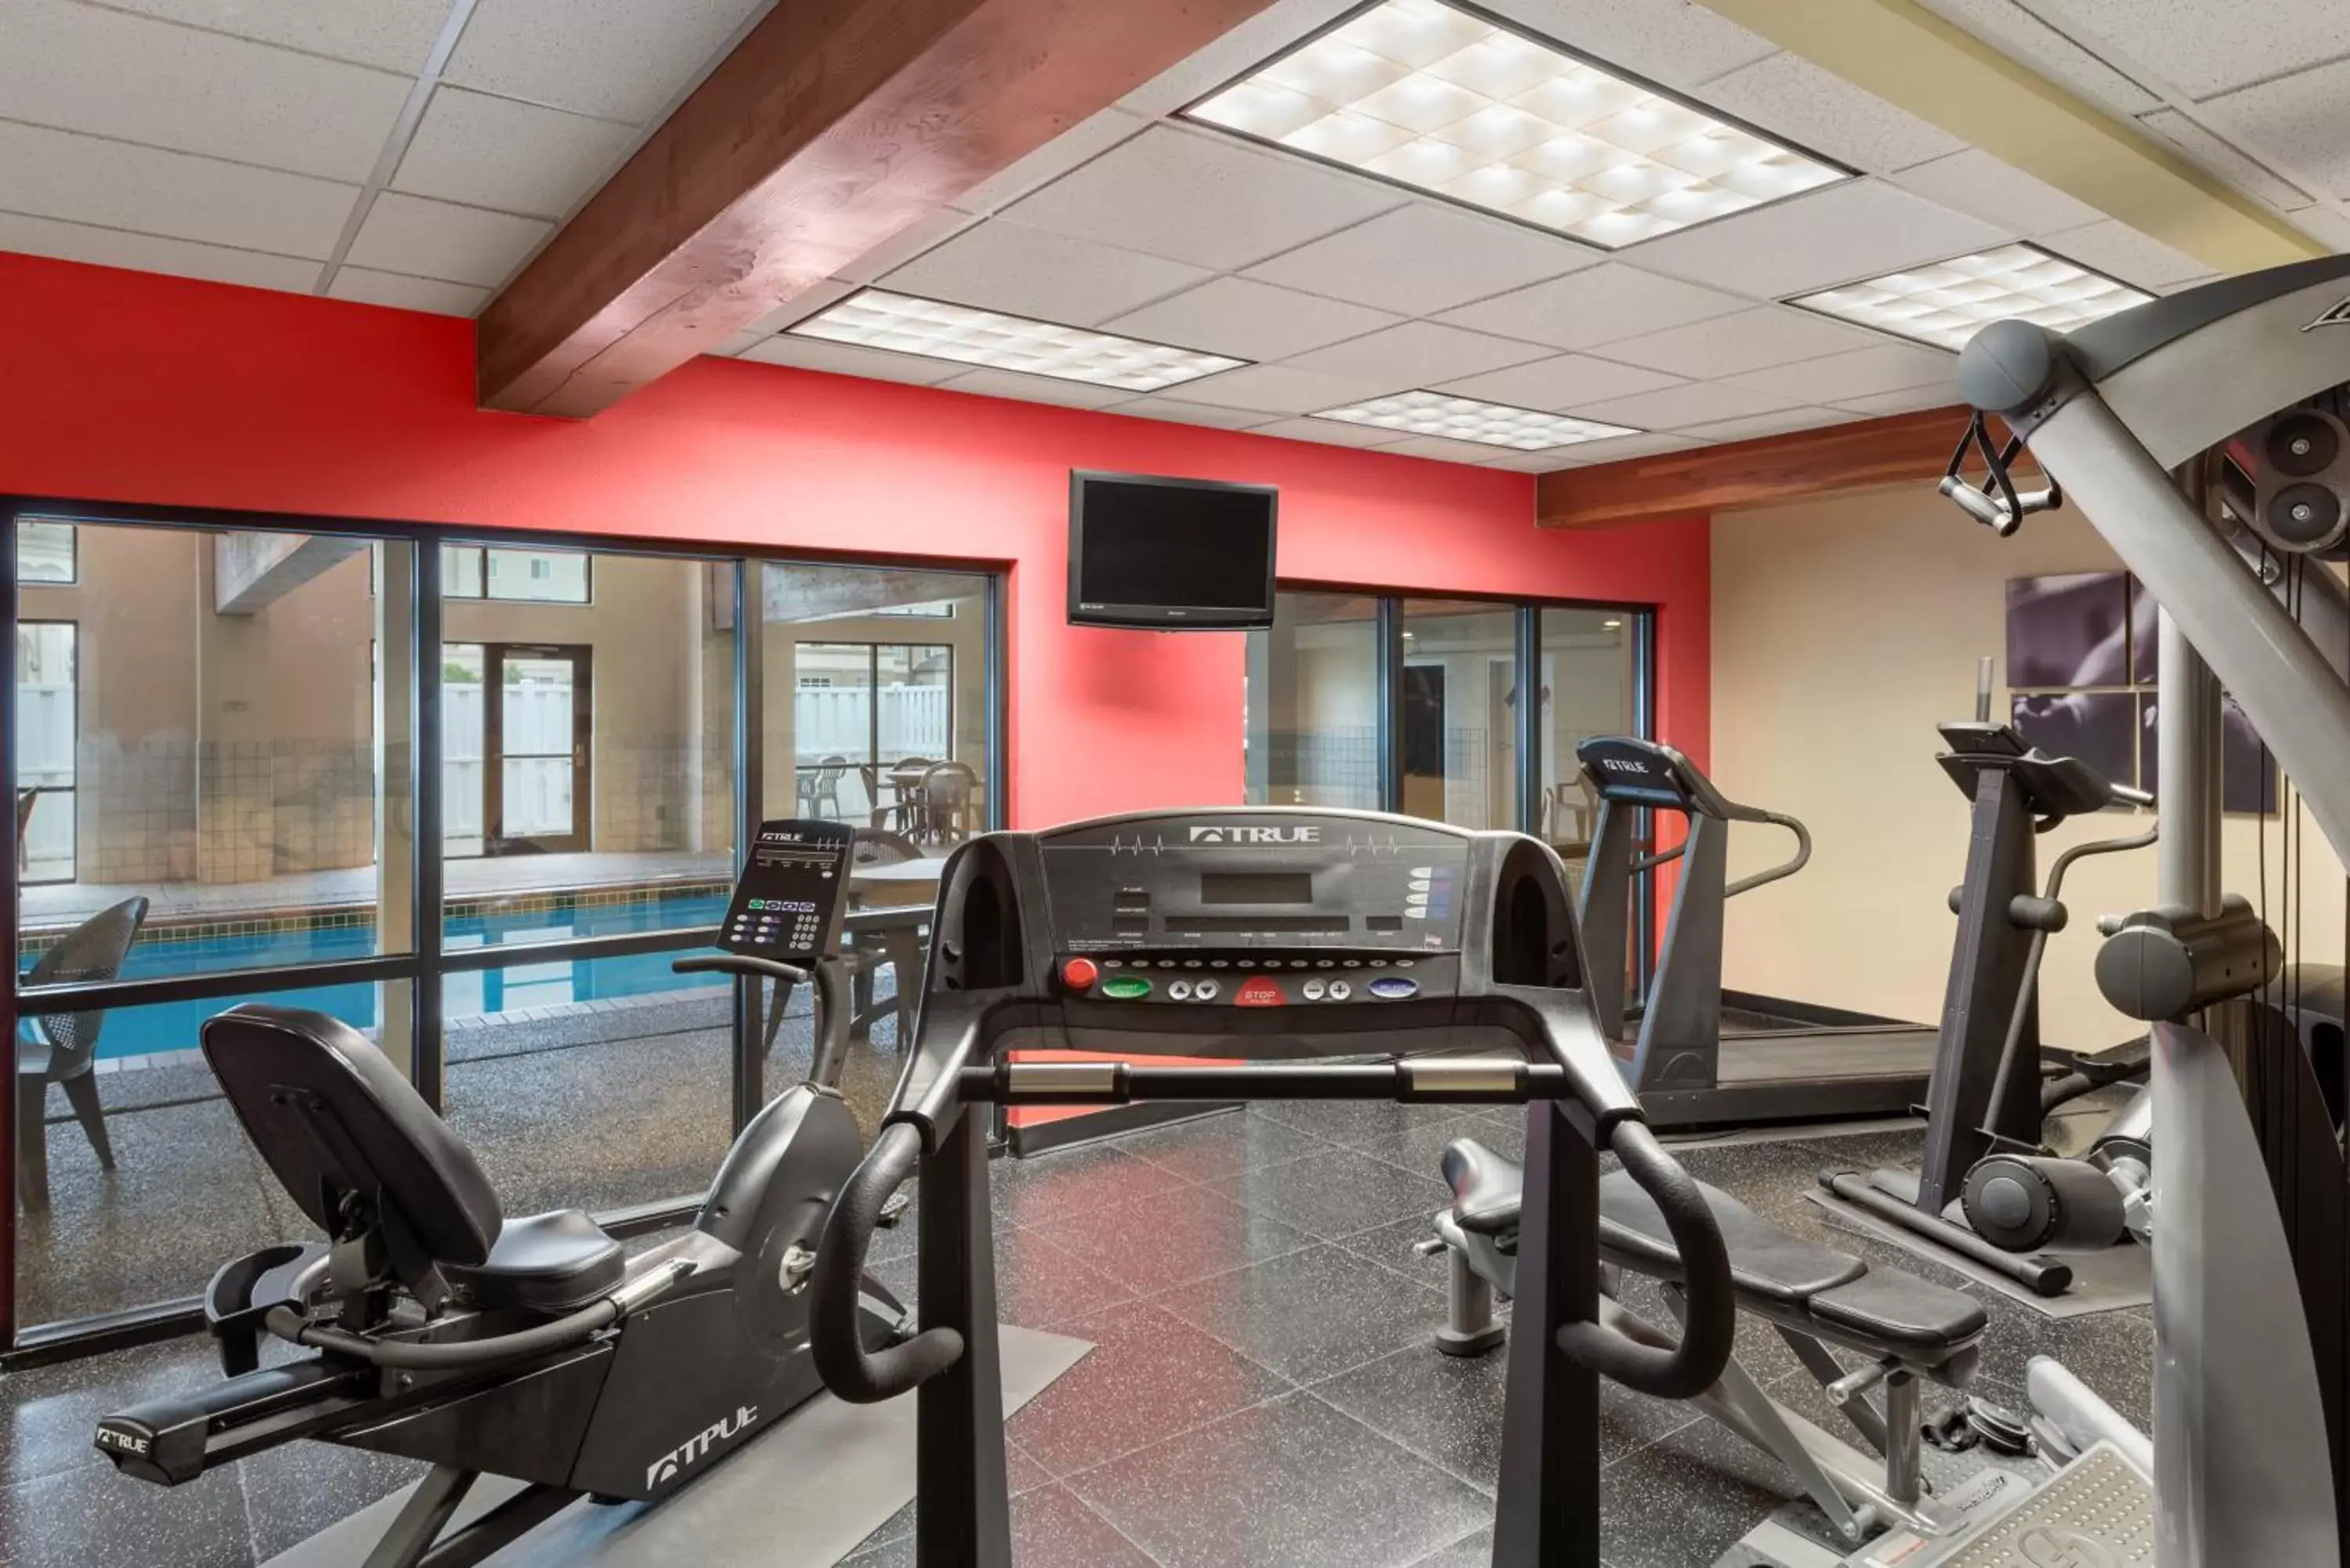 Fitness centre/facilities, Fitness Center/Facilities in Country Inn & Suites by Radisson, Council Bluffs, IA